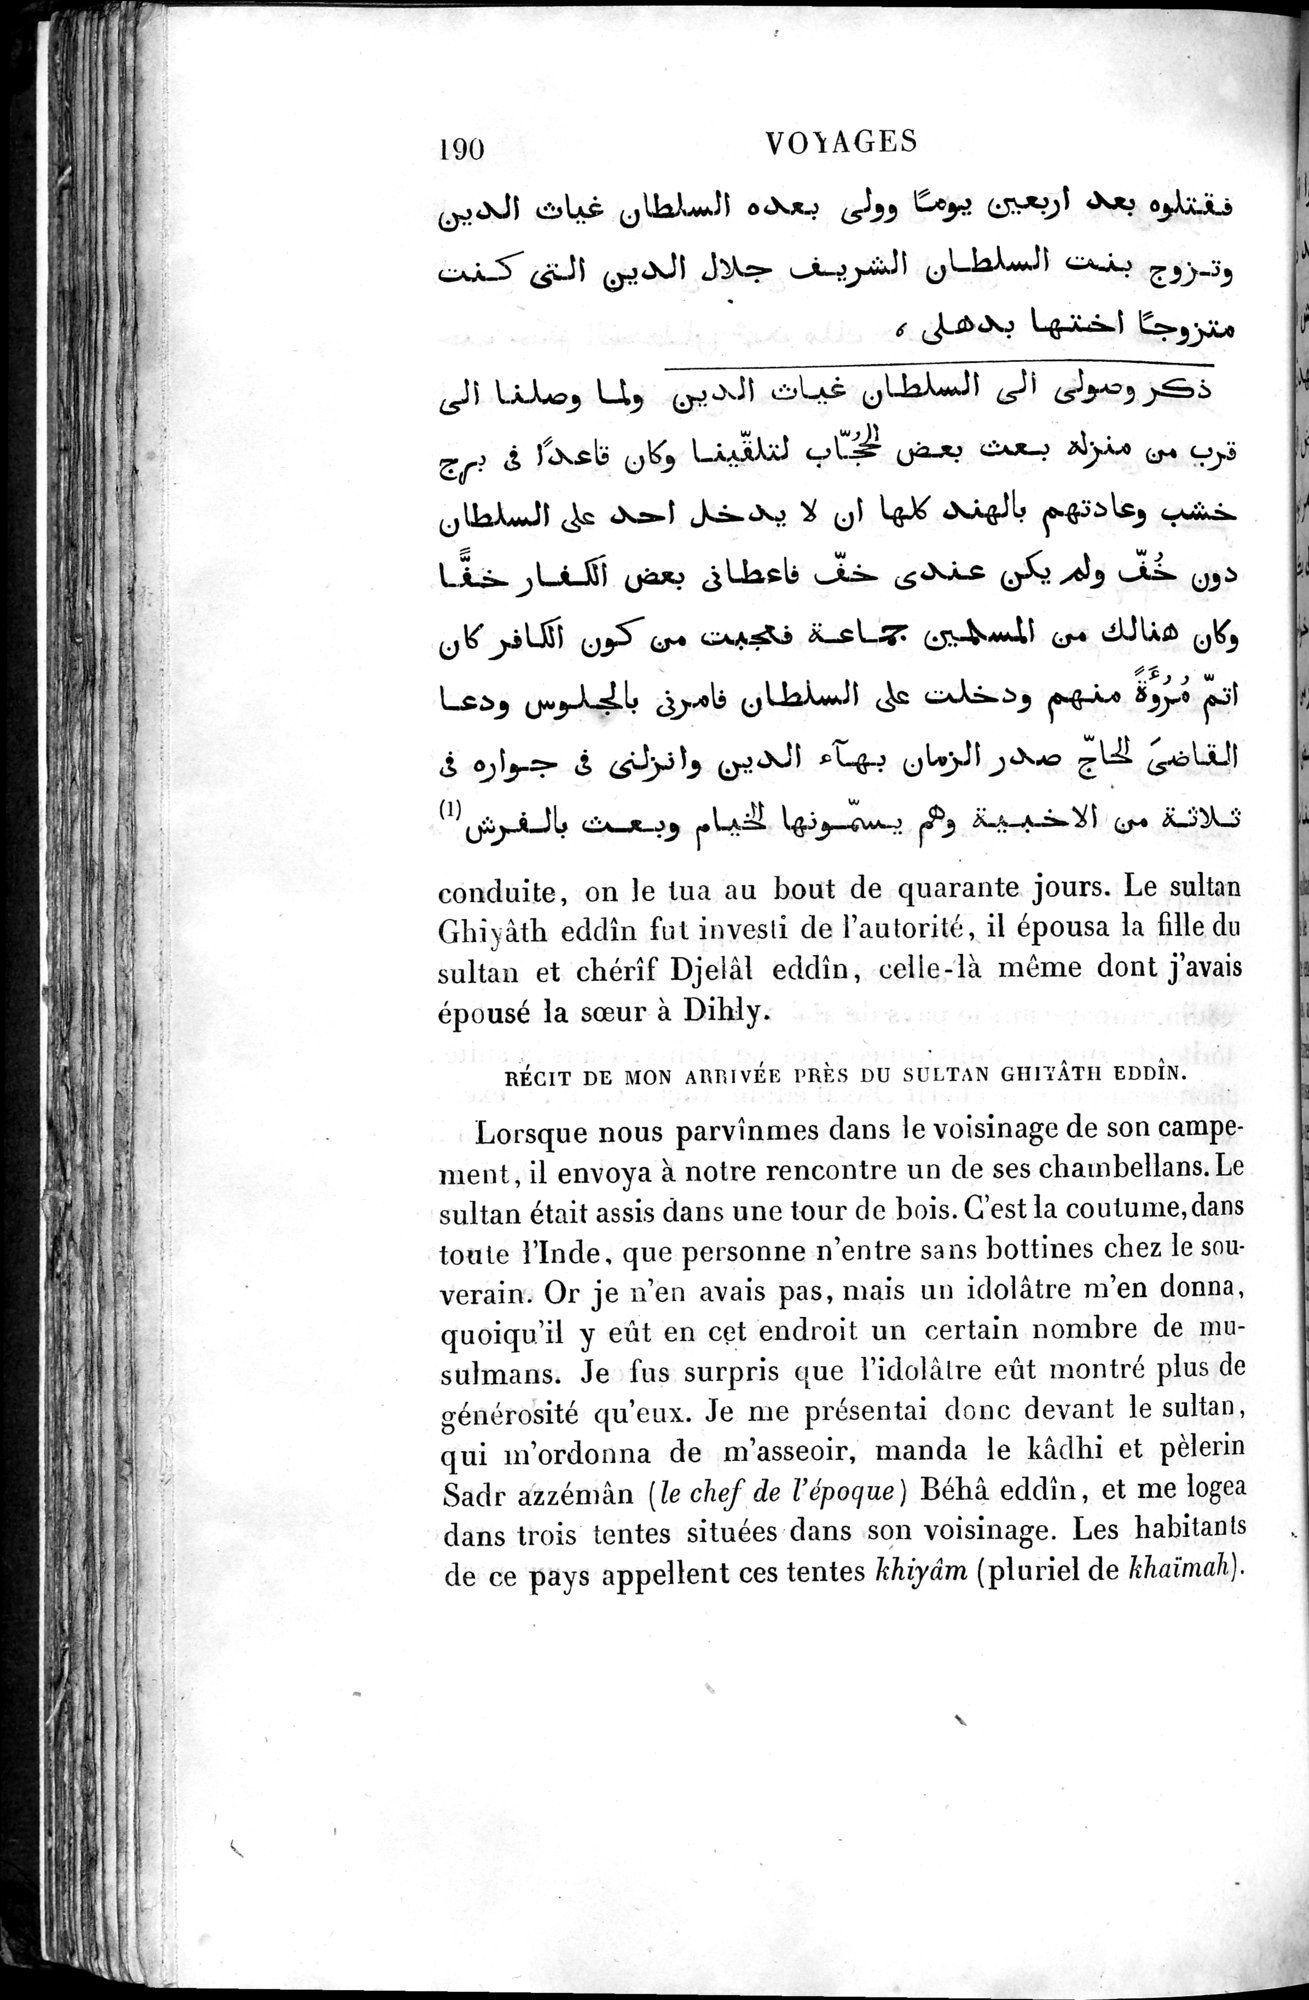 Voyages d'Ibn Batoutah : vol.4 / Page 202 (Grayscale High Resolution Image)